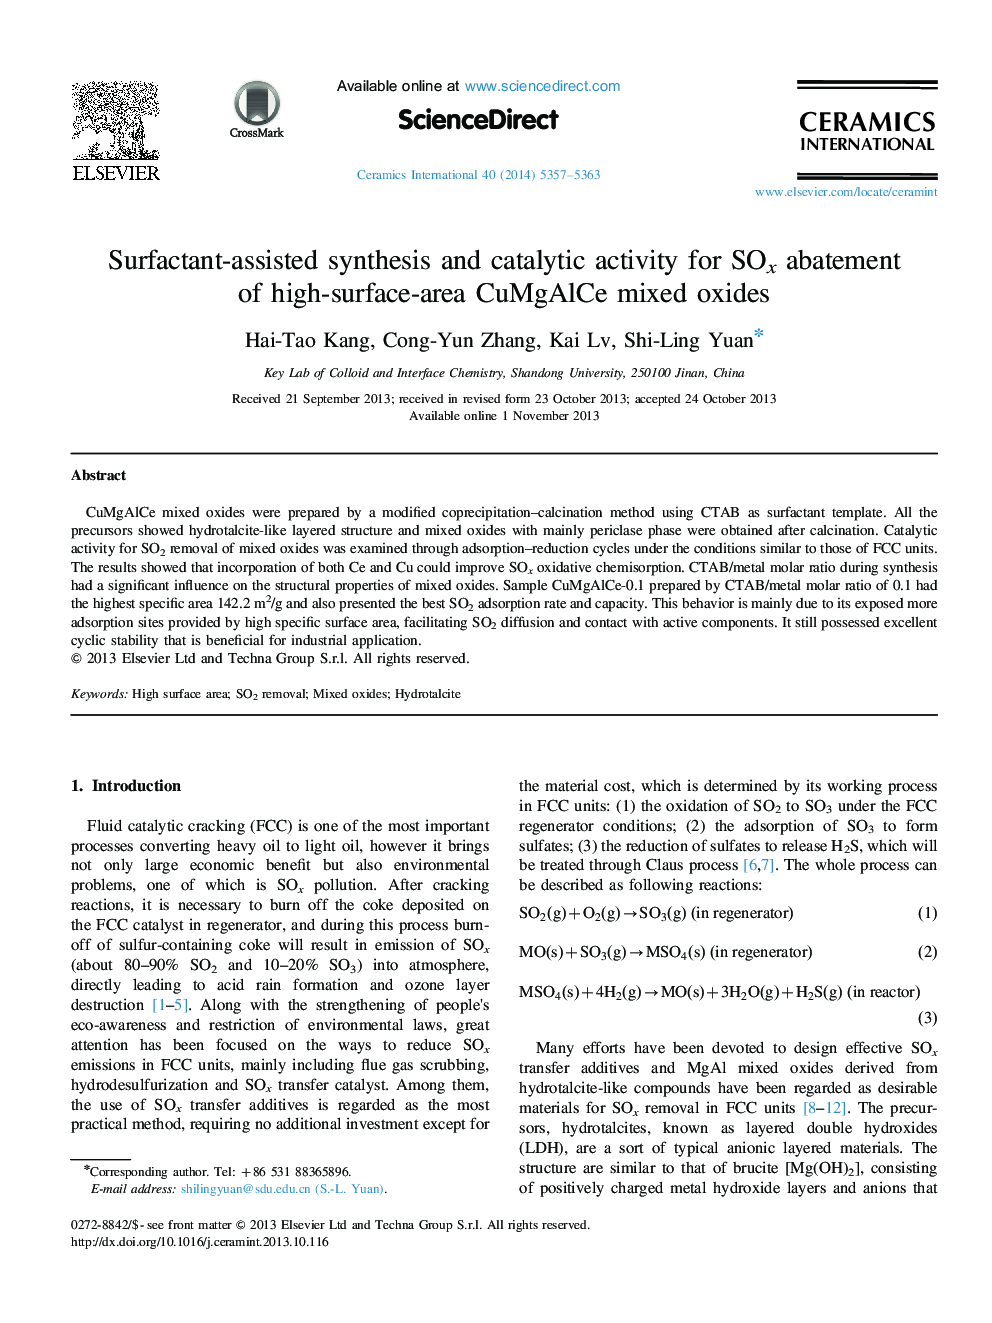 Surfactant-assisted synthesis and catalytic activity for SOx abatement of high-surface-area CuMgAlCe mixed oxides